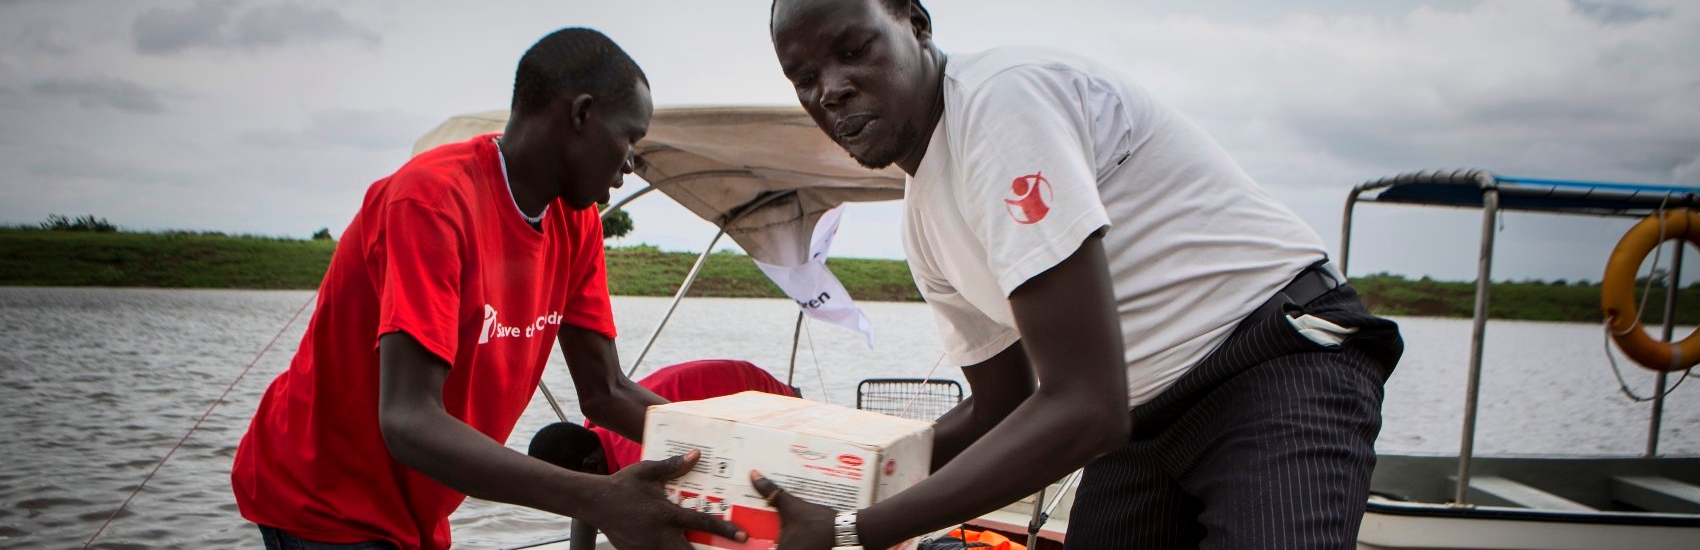 Save the Children field staff offloading a boat with food supplements for malnourished children in remote villages in Akobo, South Sudan. Photo Credit: Jonathan Hyams/Save the Children 2014.